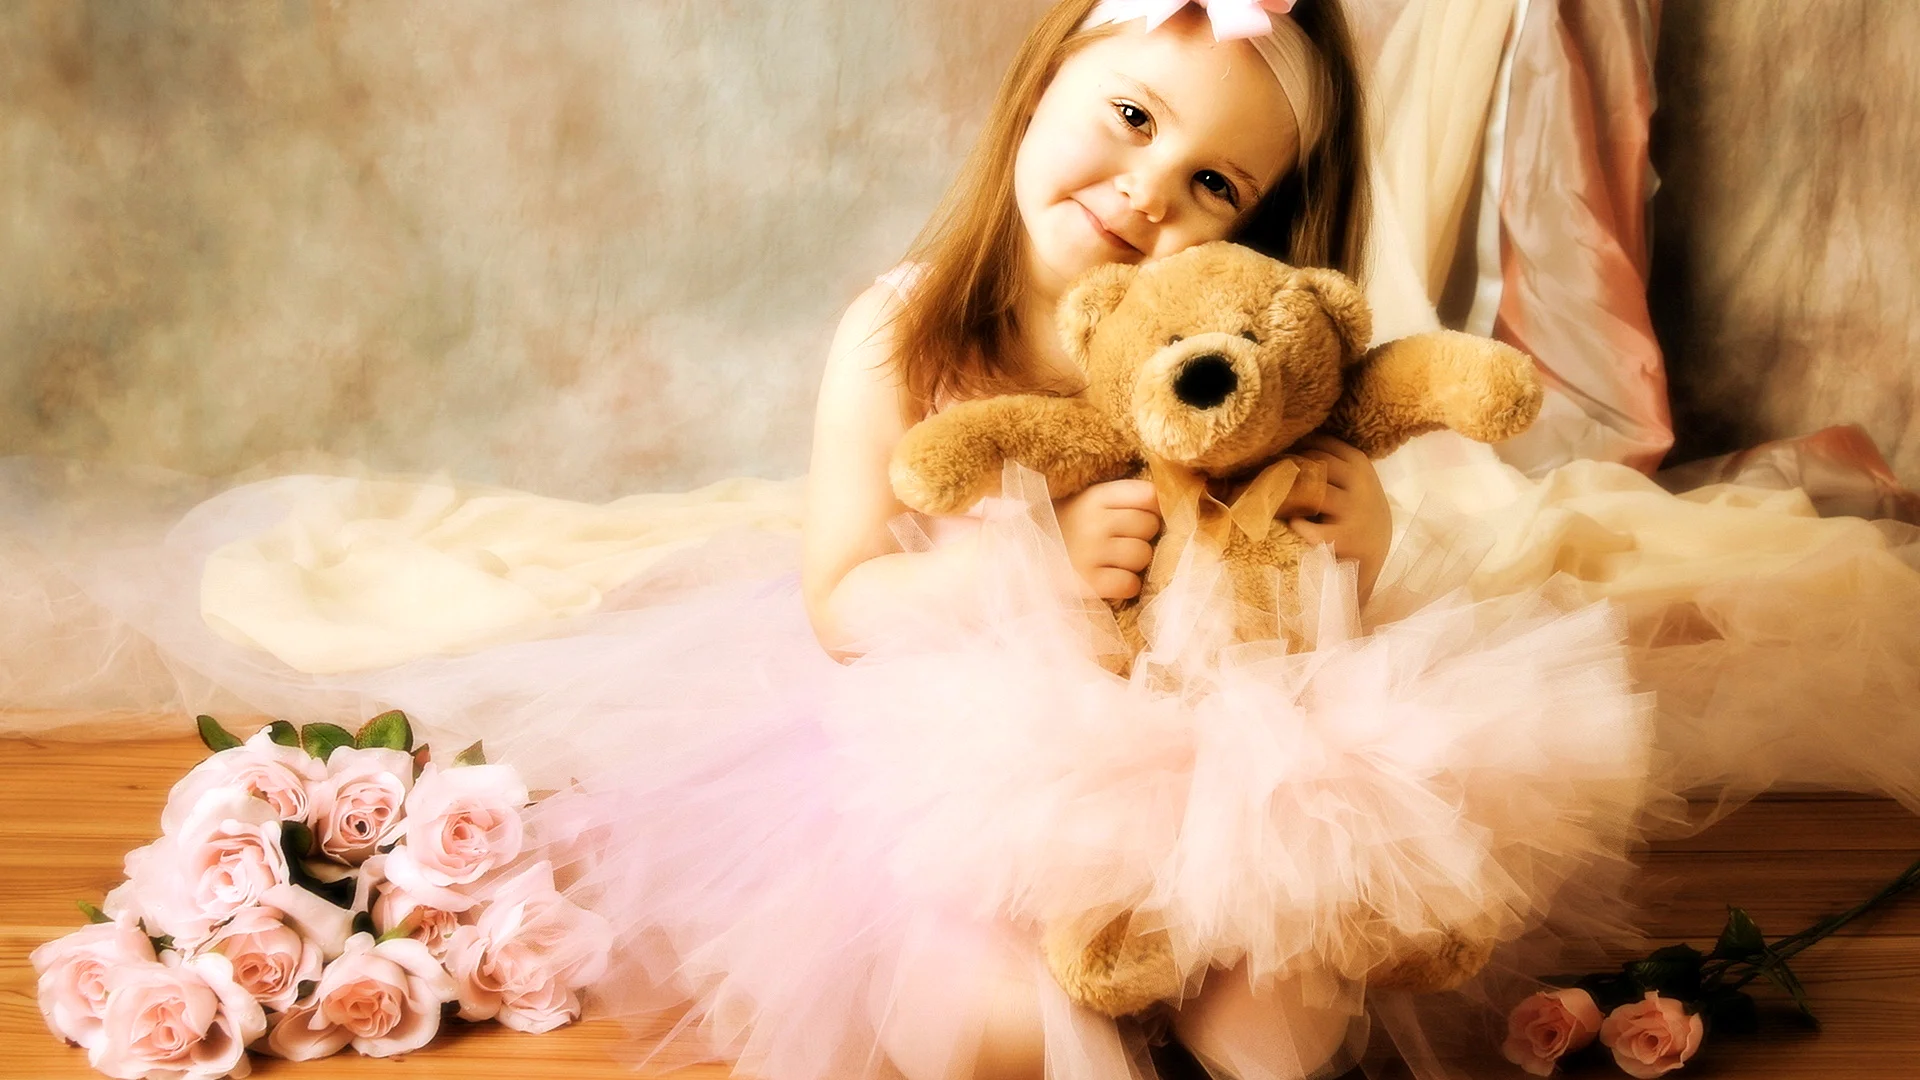 Baby With Teddy Bear Wallpaper